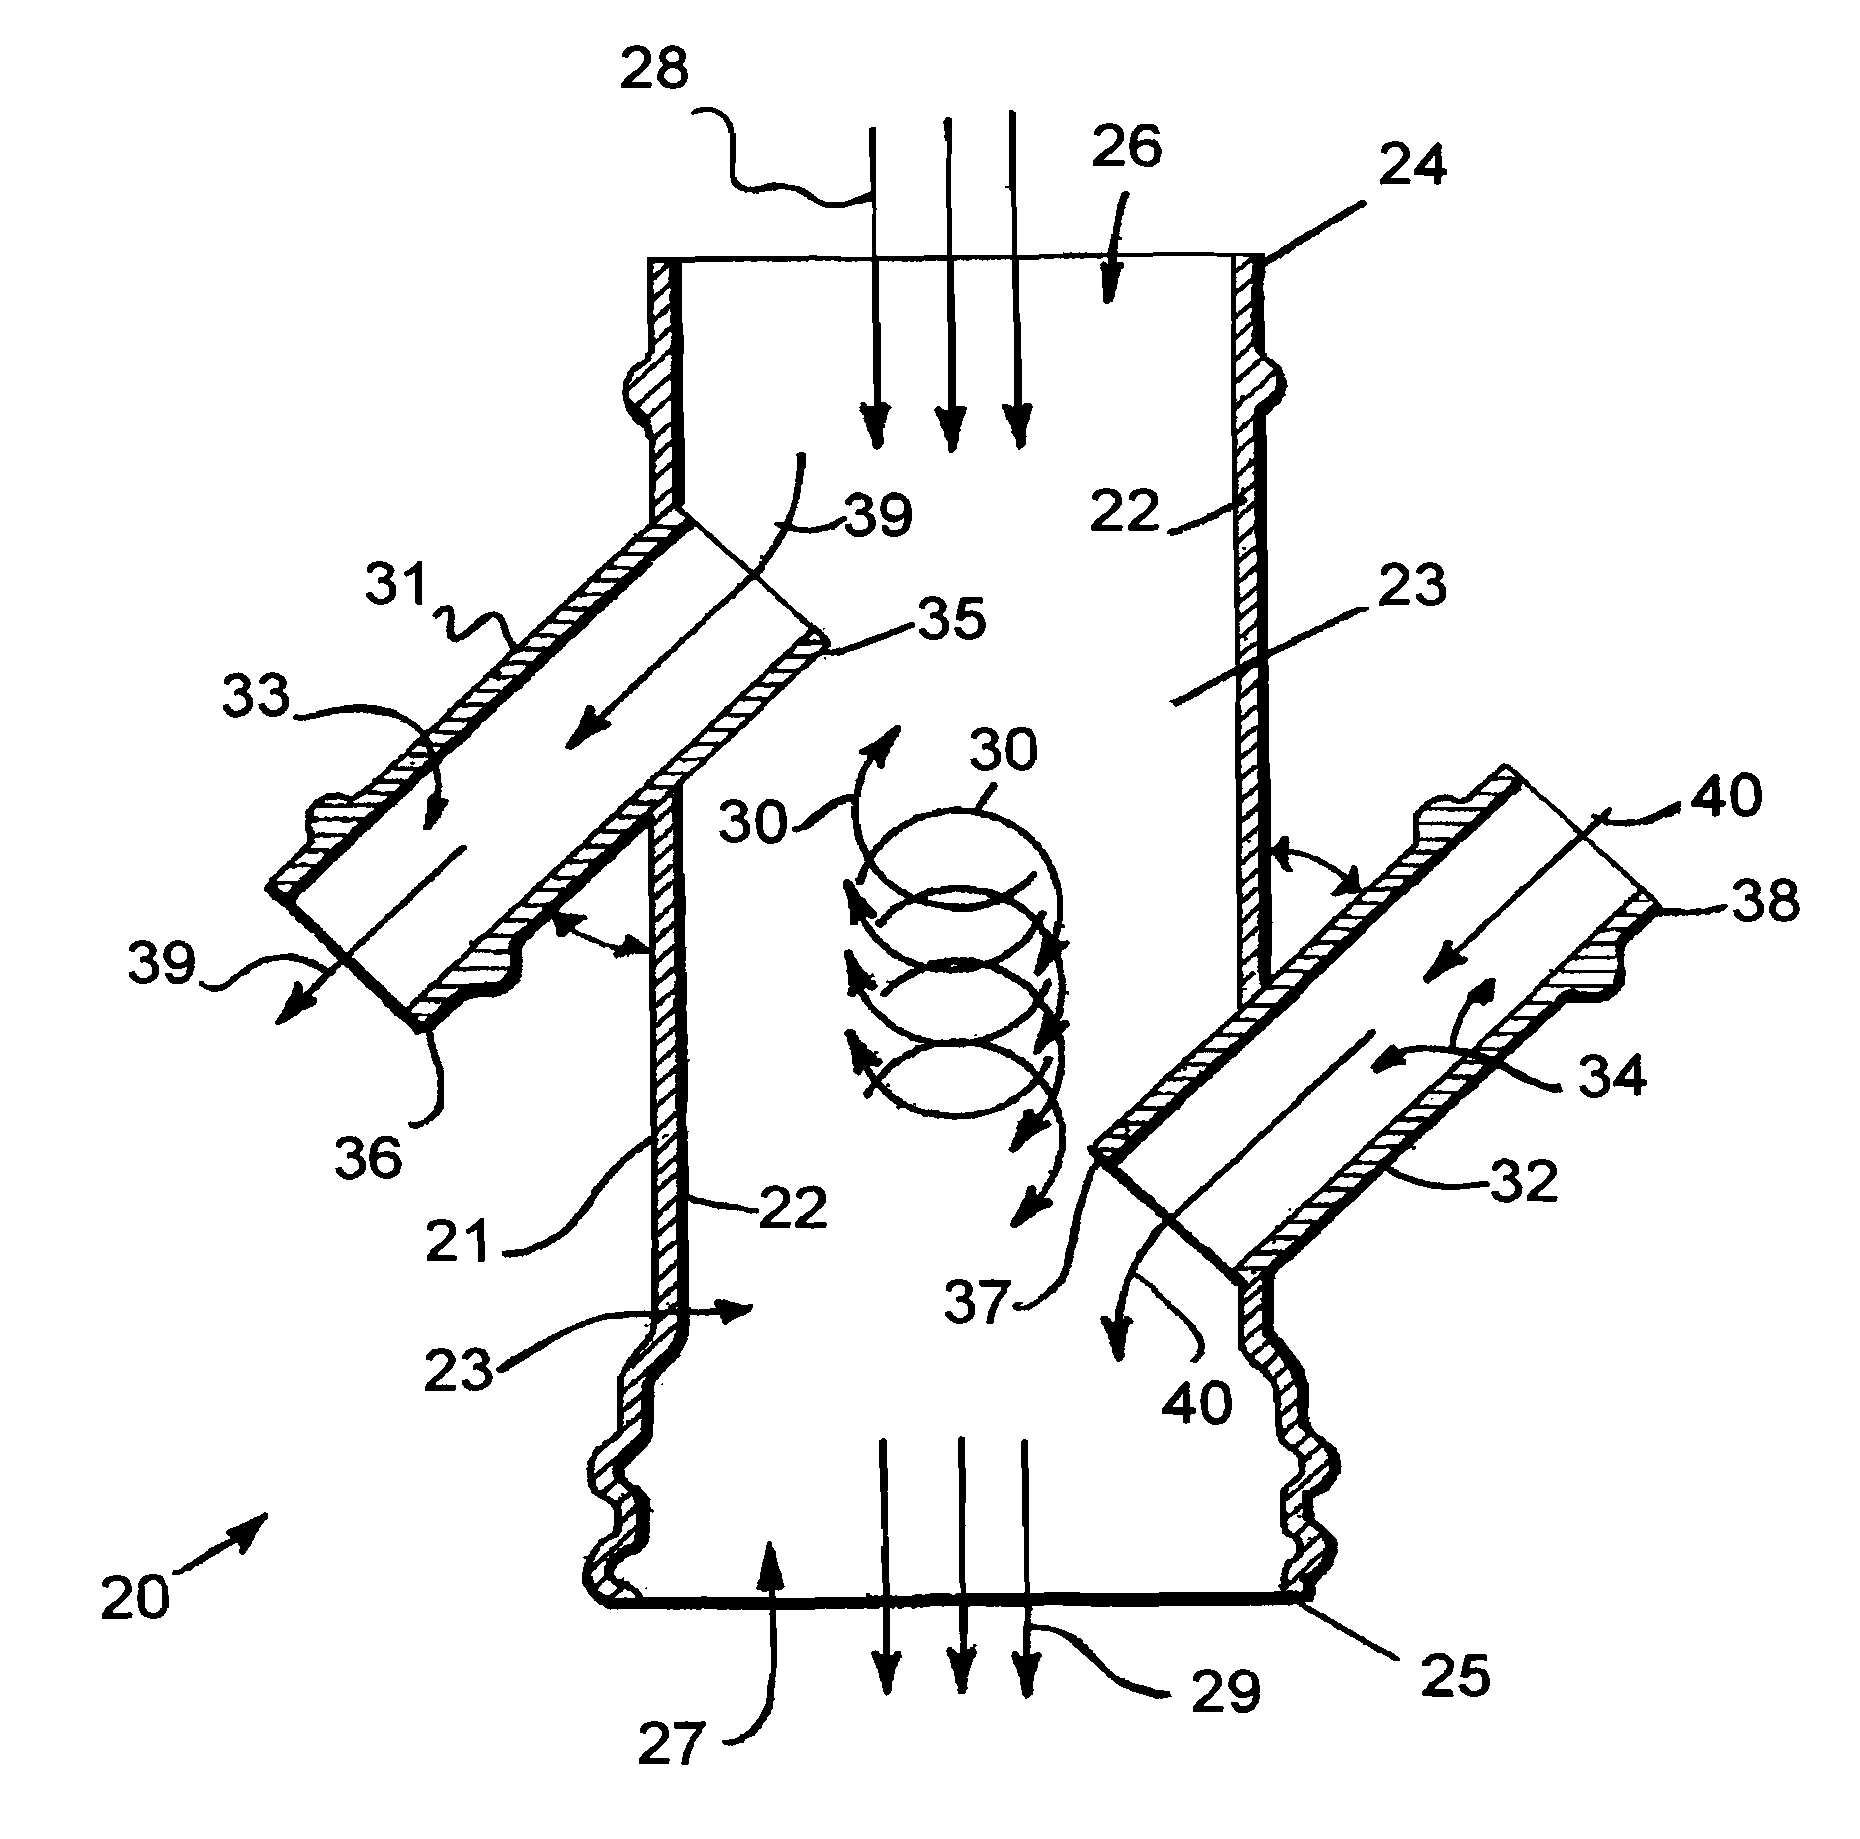 Water heating apparatus for continuous heated water flow and method for use in hydraulic fracturing